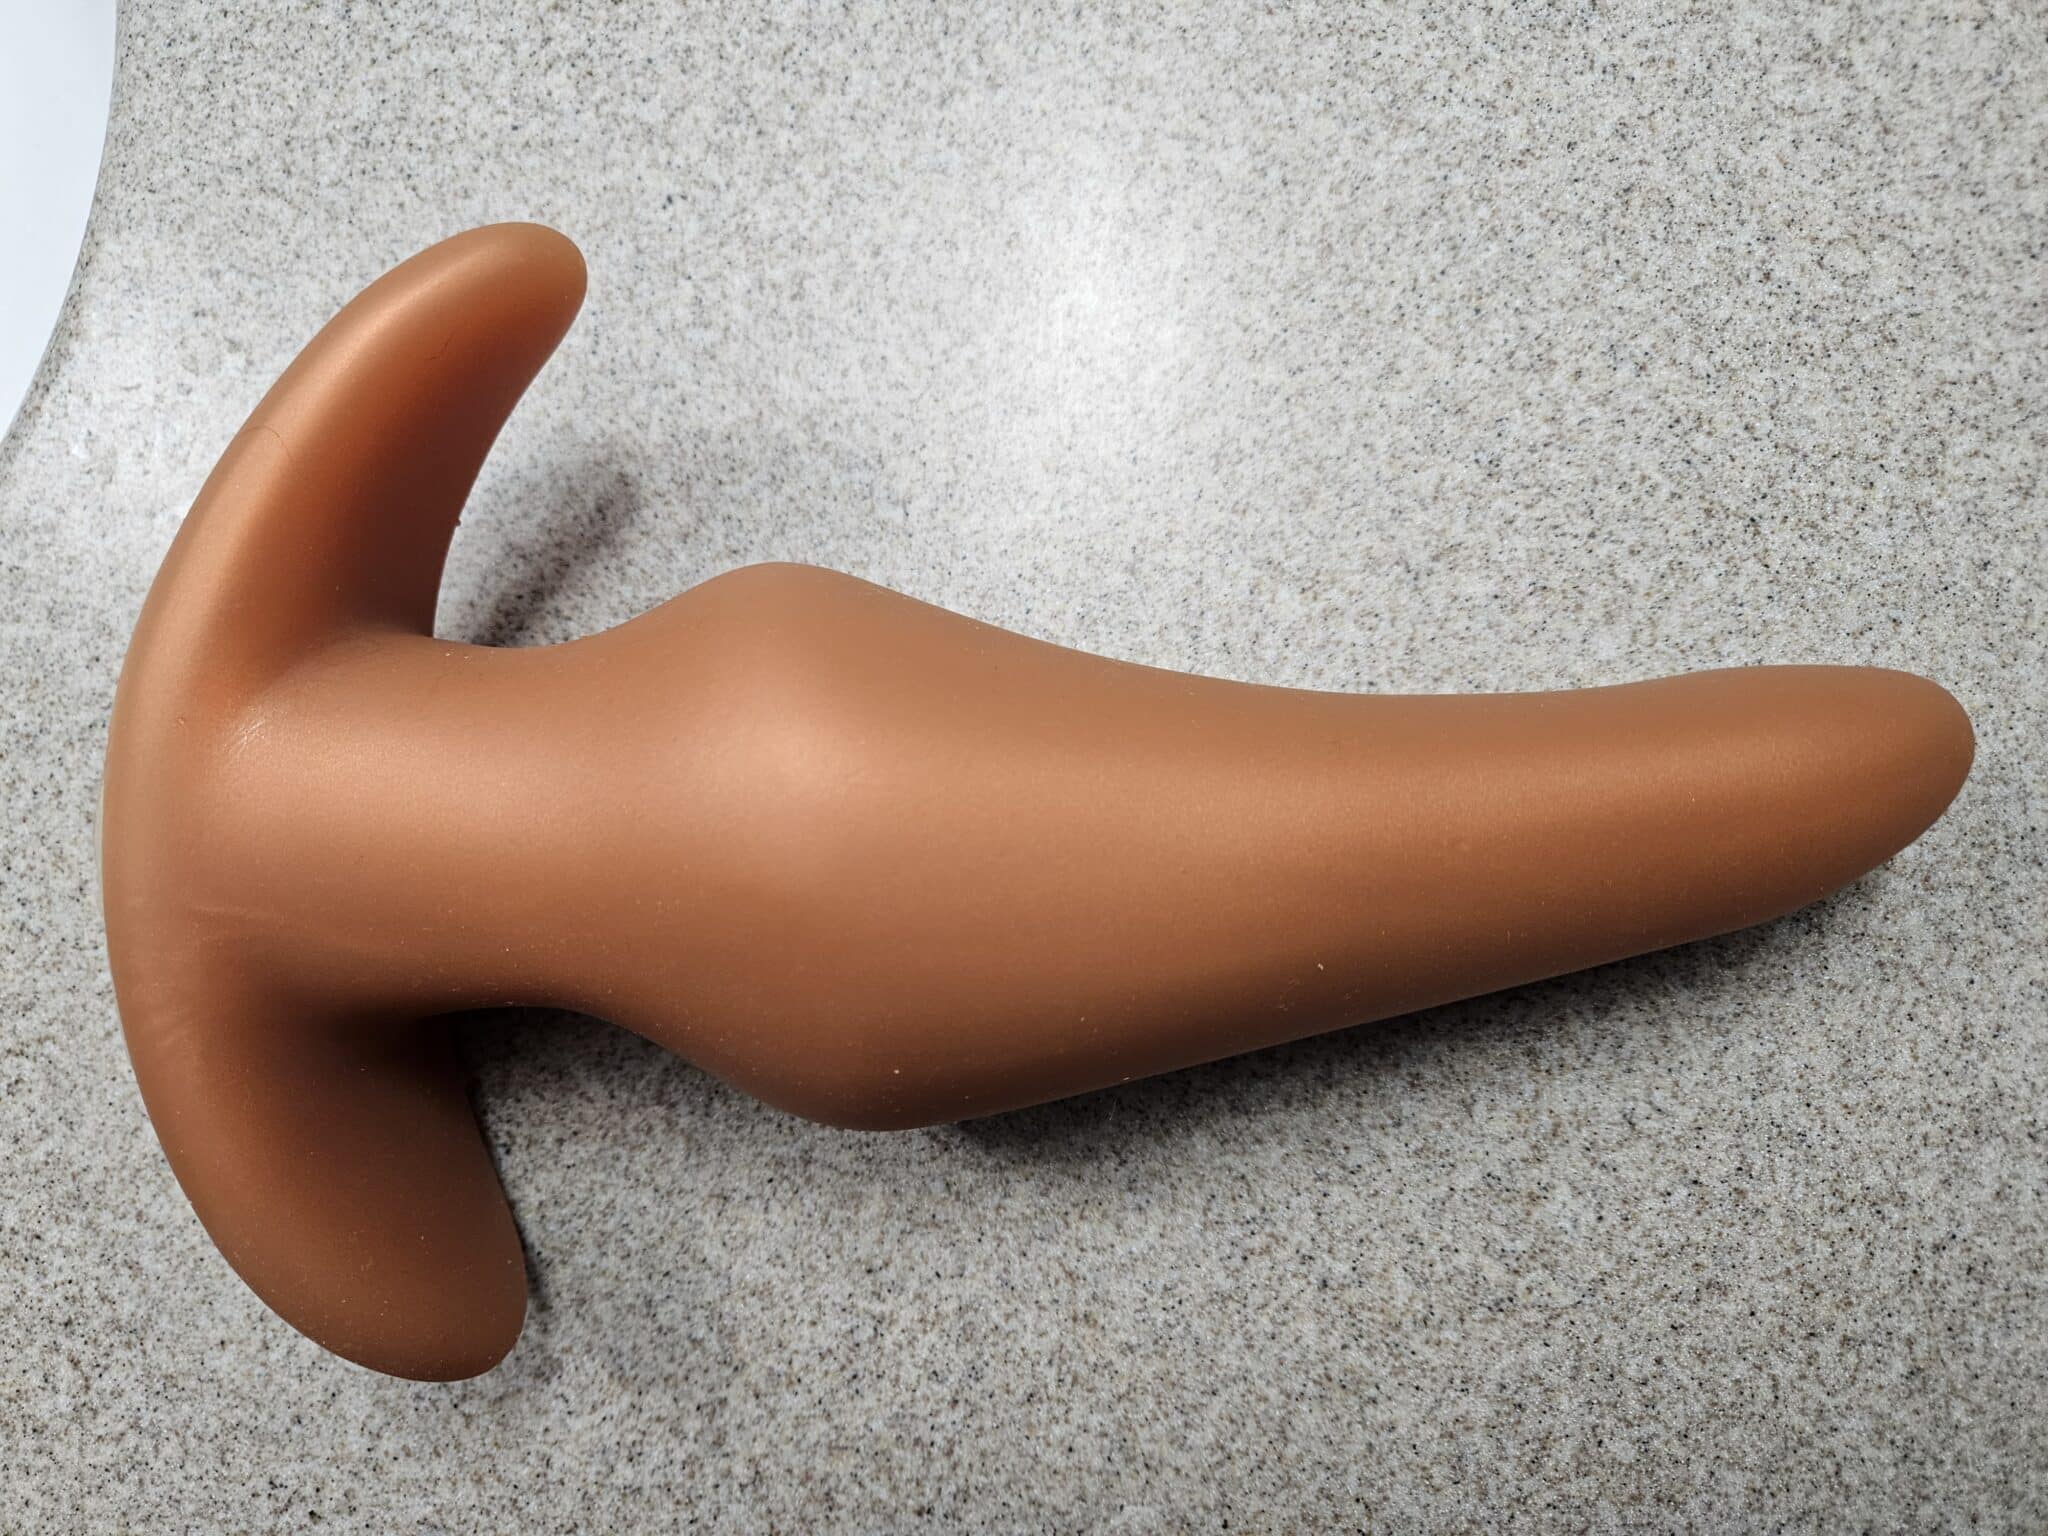 G-Spot Tickler XL Butt Plug The Ease of use of the G-Spot Tickler XL Butt Plug